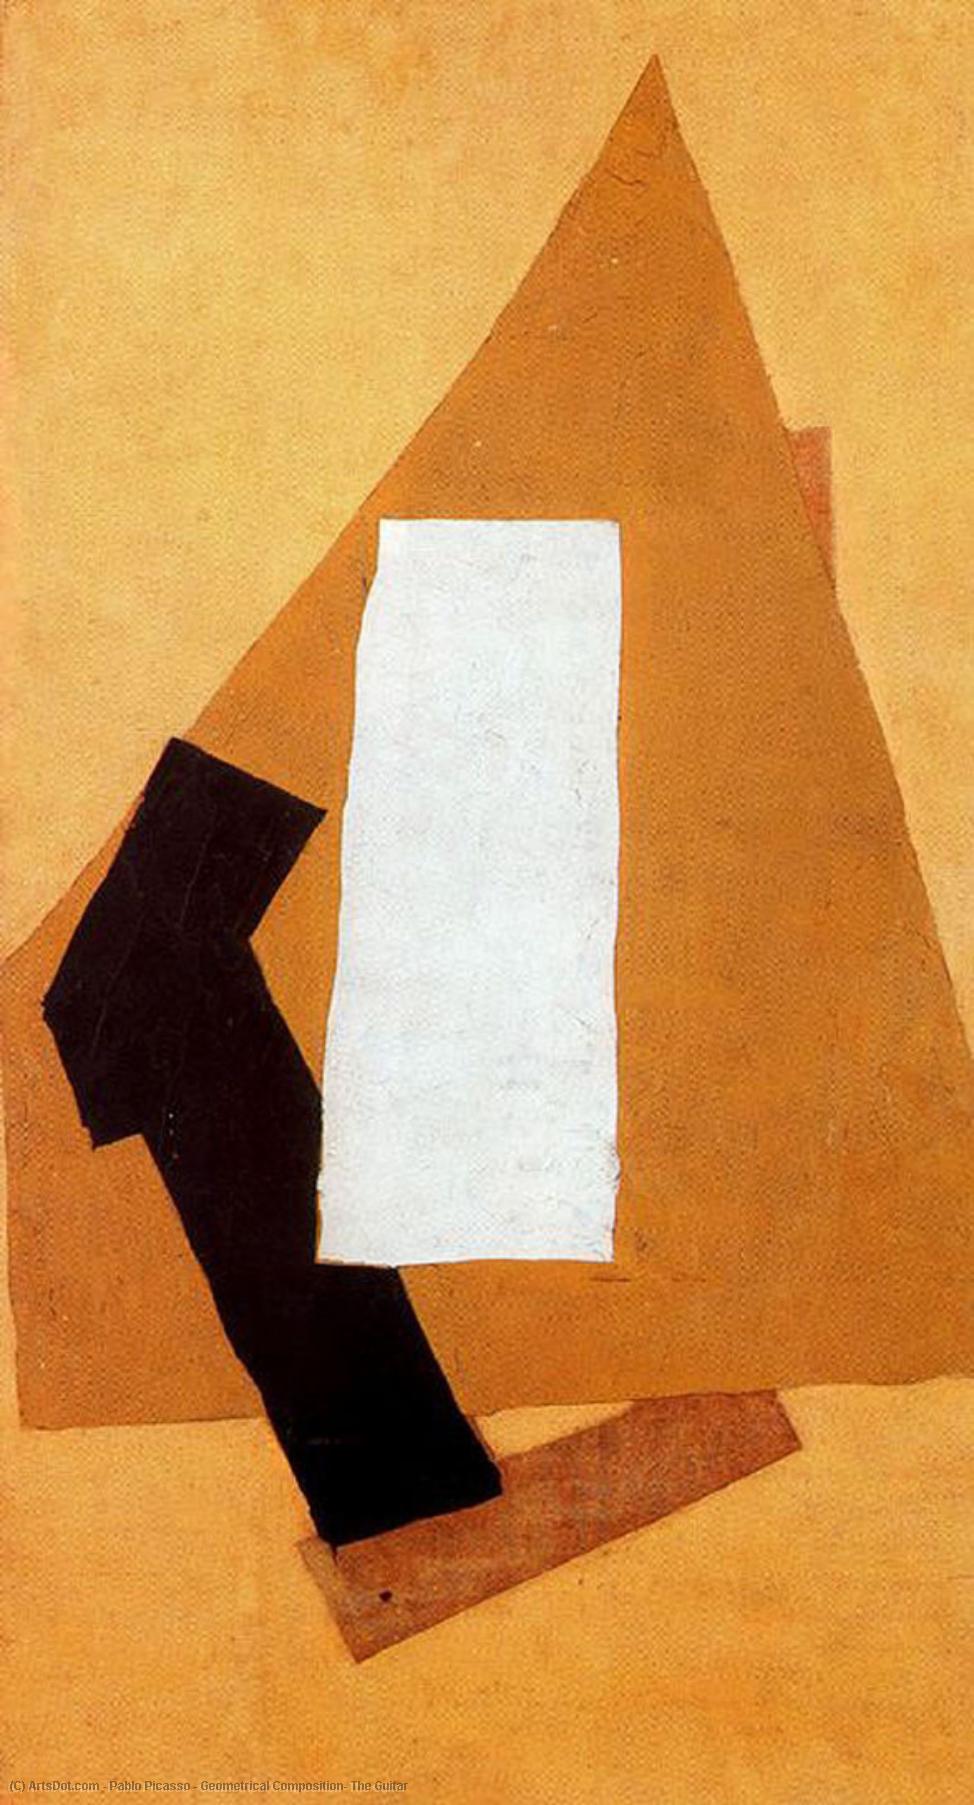 WikiOO.org - 백과 사전 - 회화, 삽화 Pablo Picasso - Geometrical Composition: The Guitar